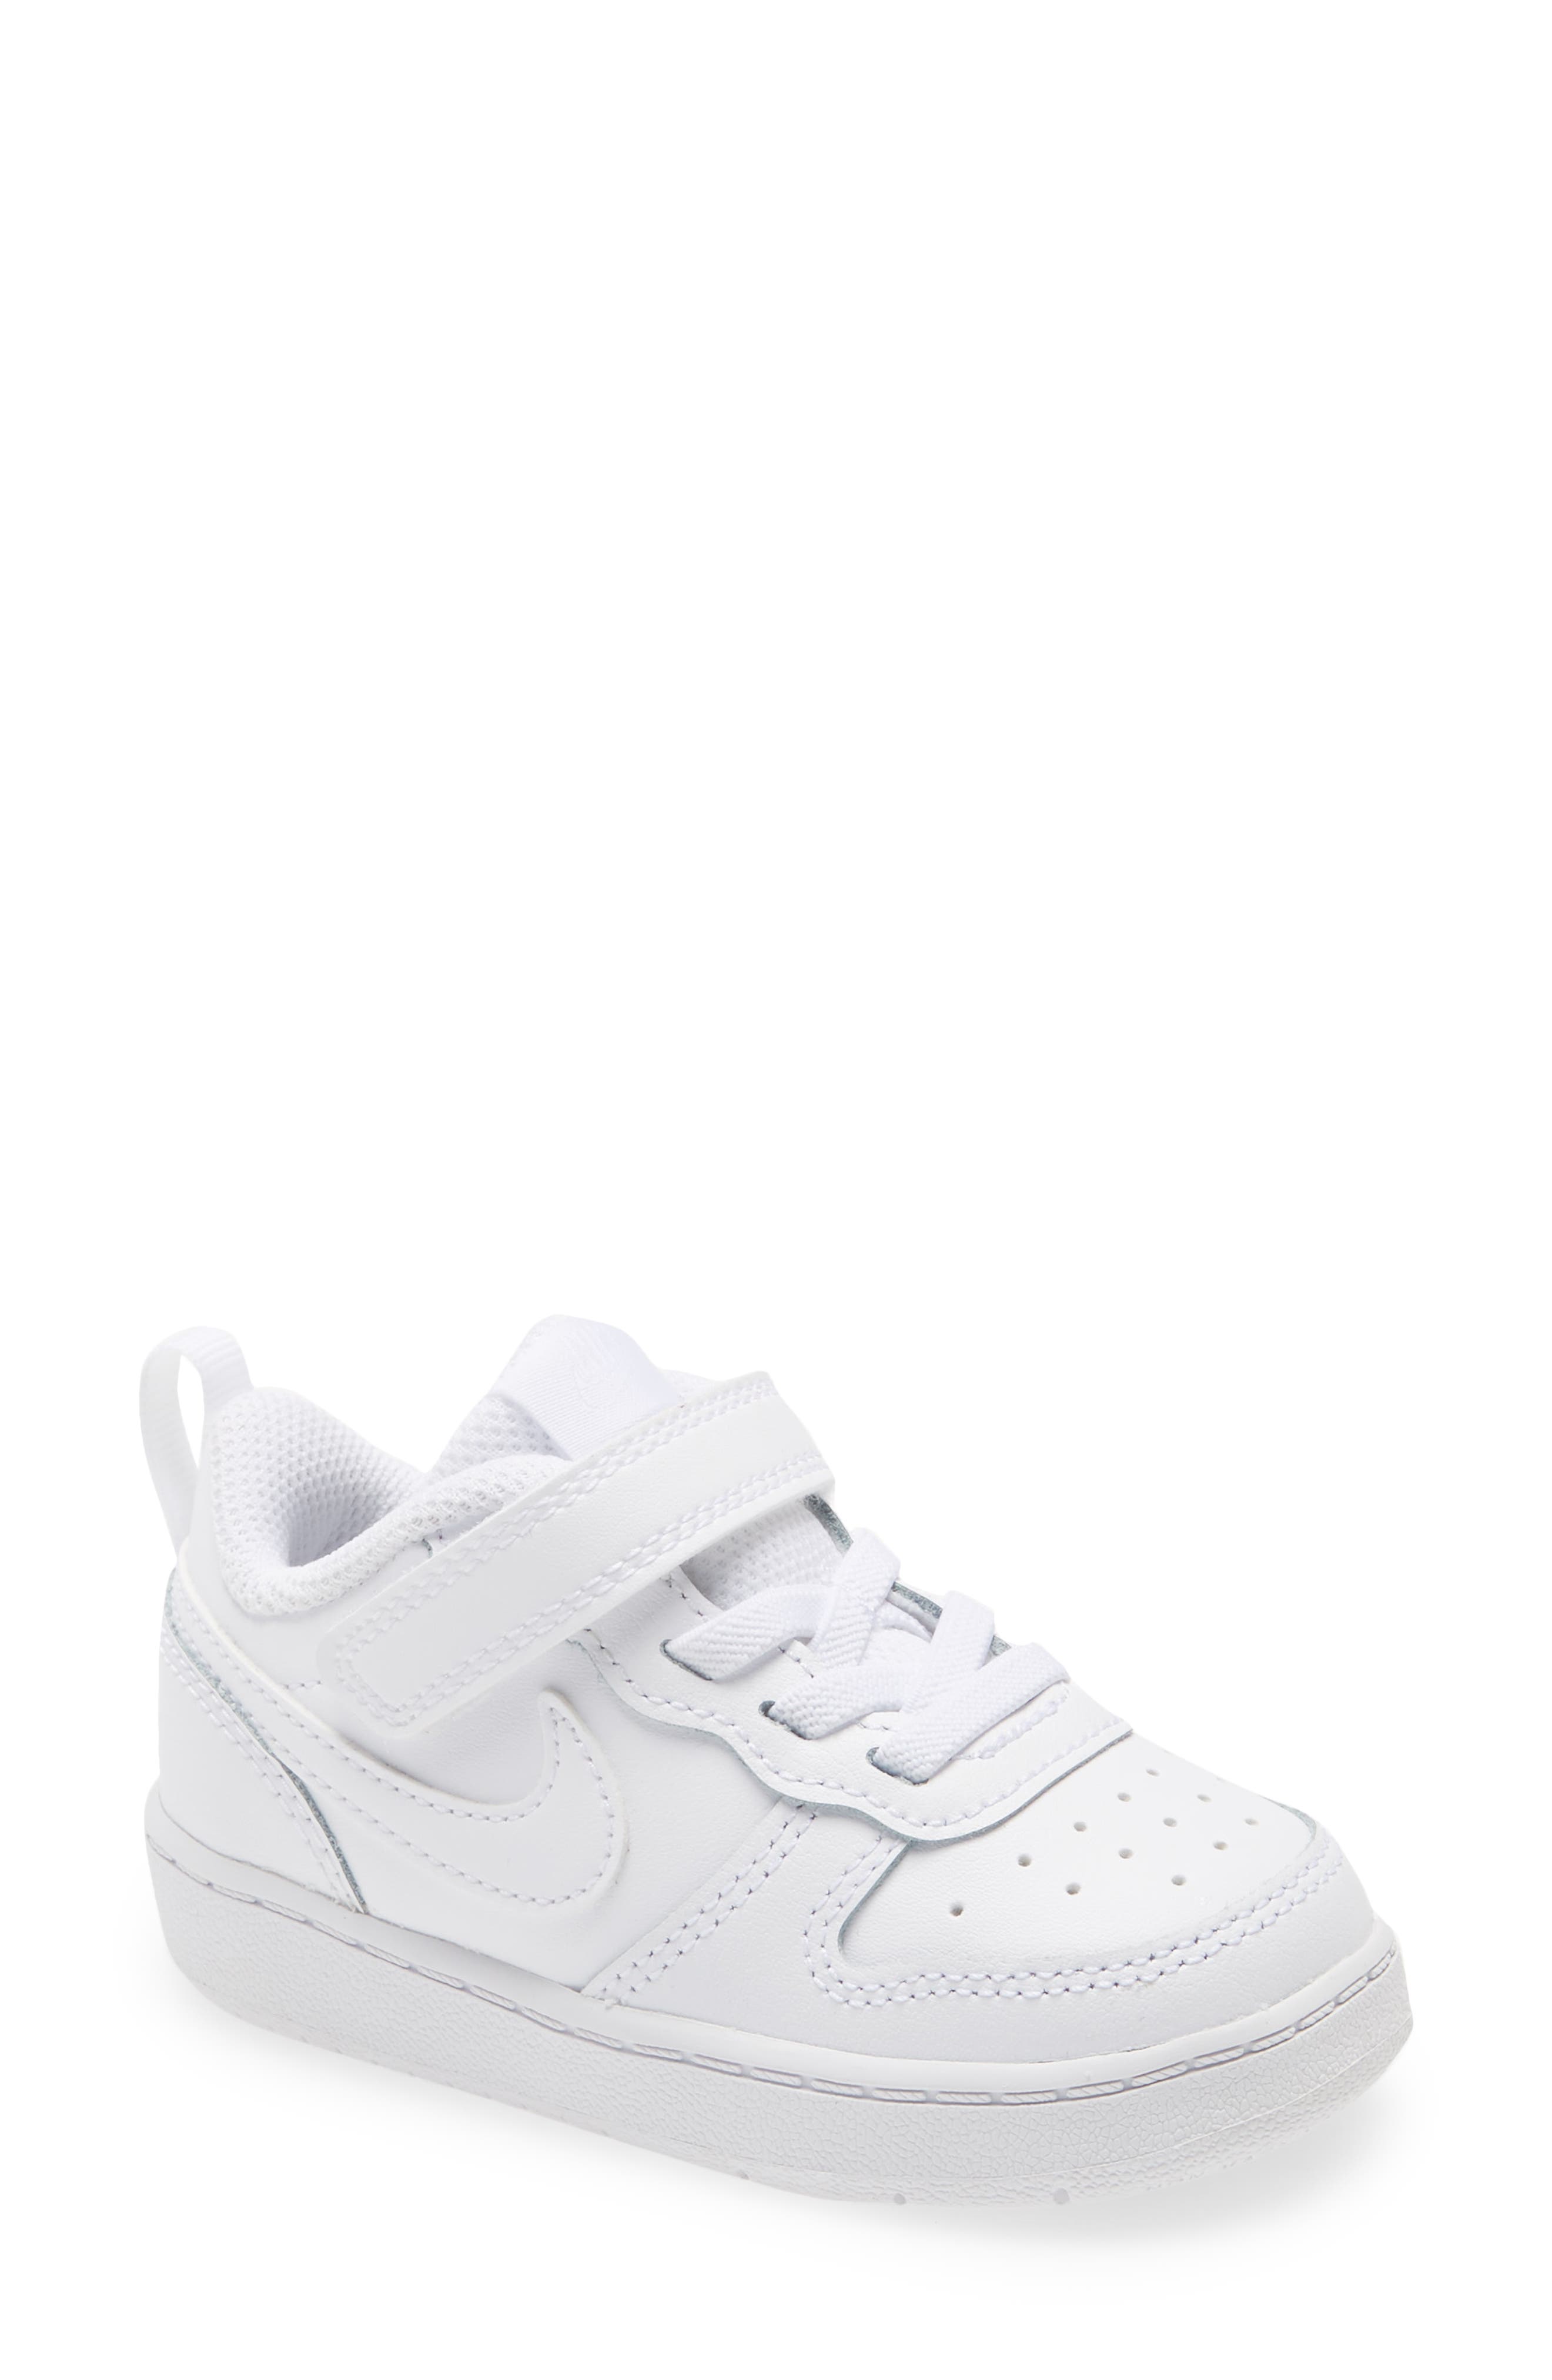 nike shoes for toddler boy